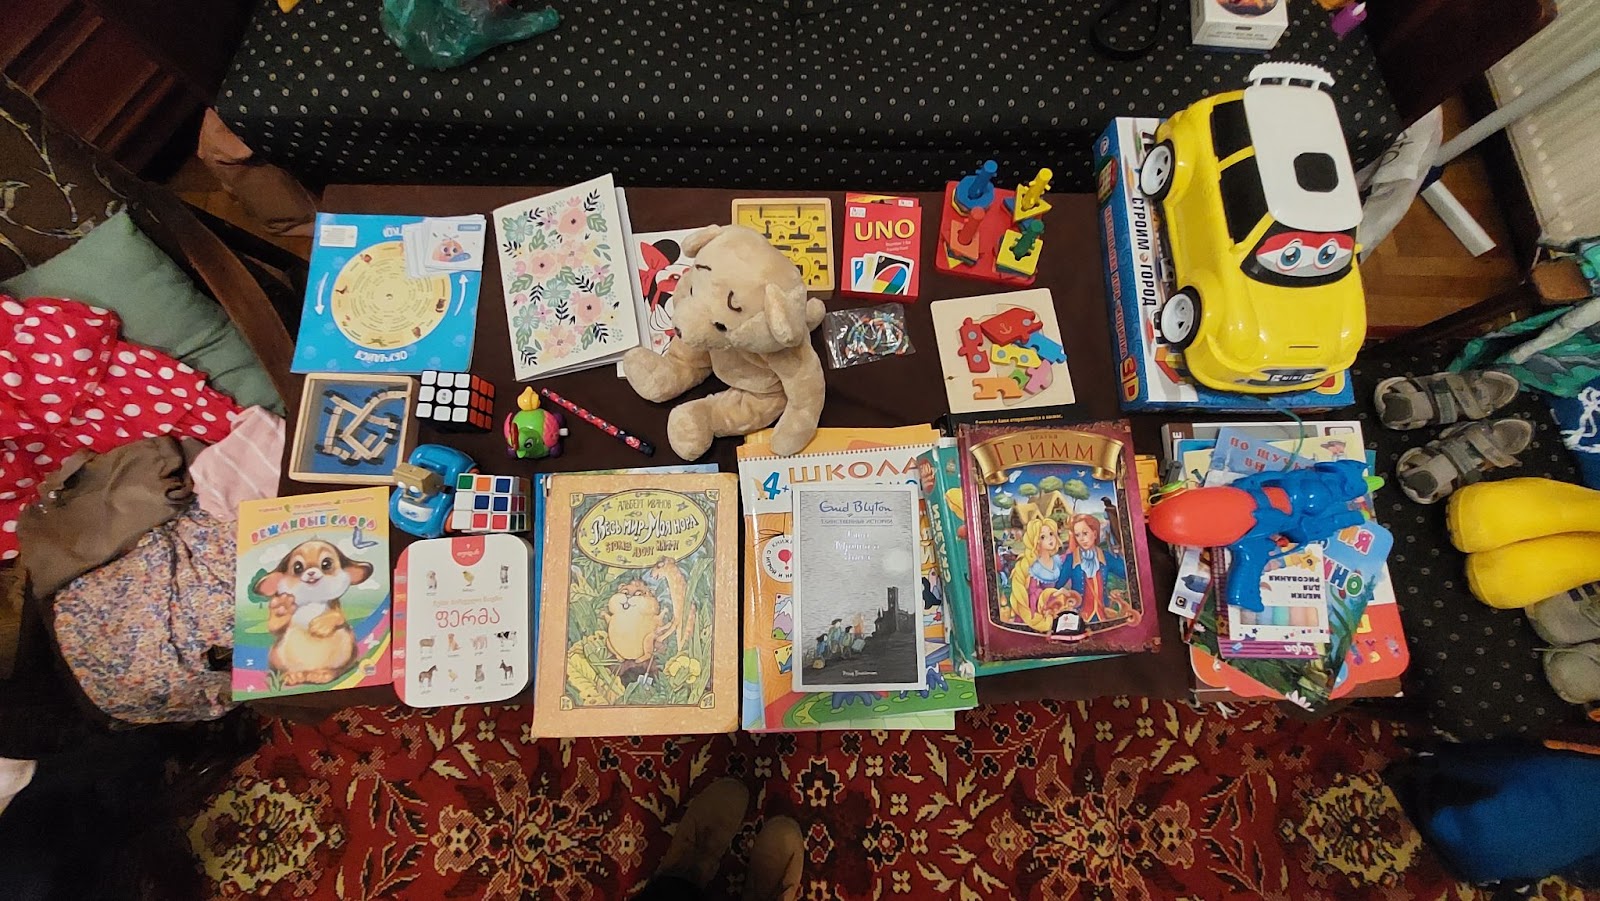 People exchanged books, toys and clothes. 